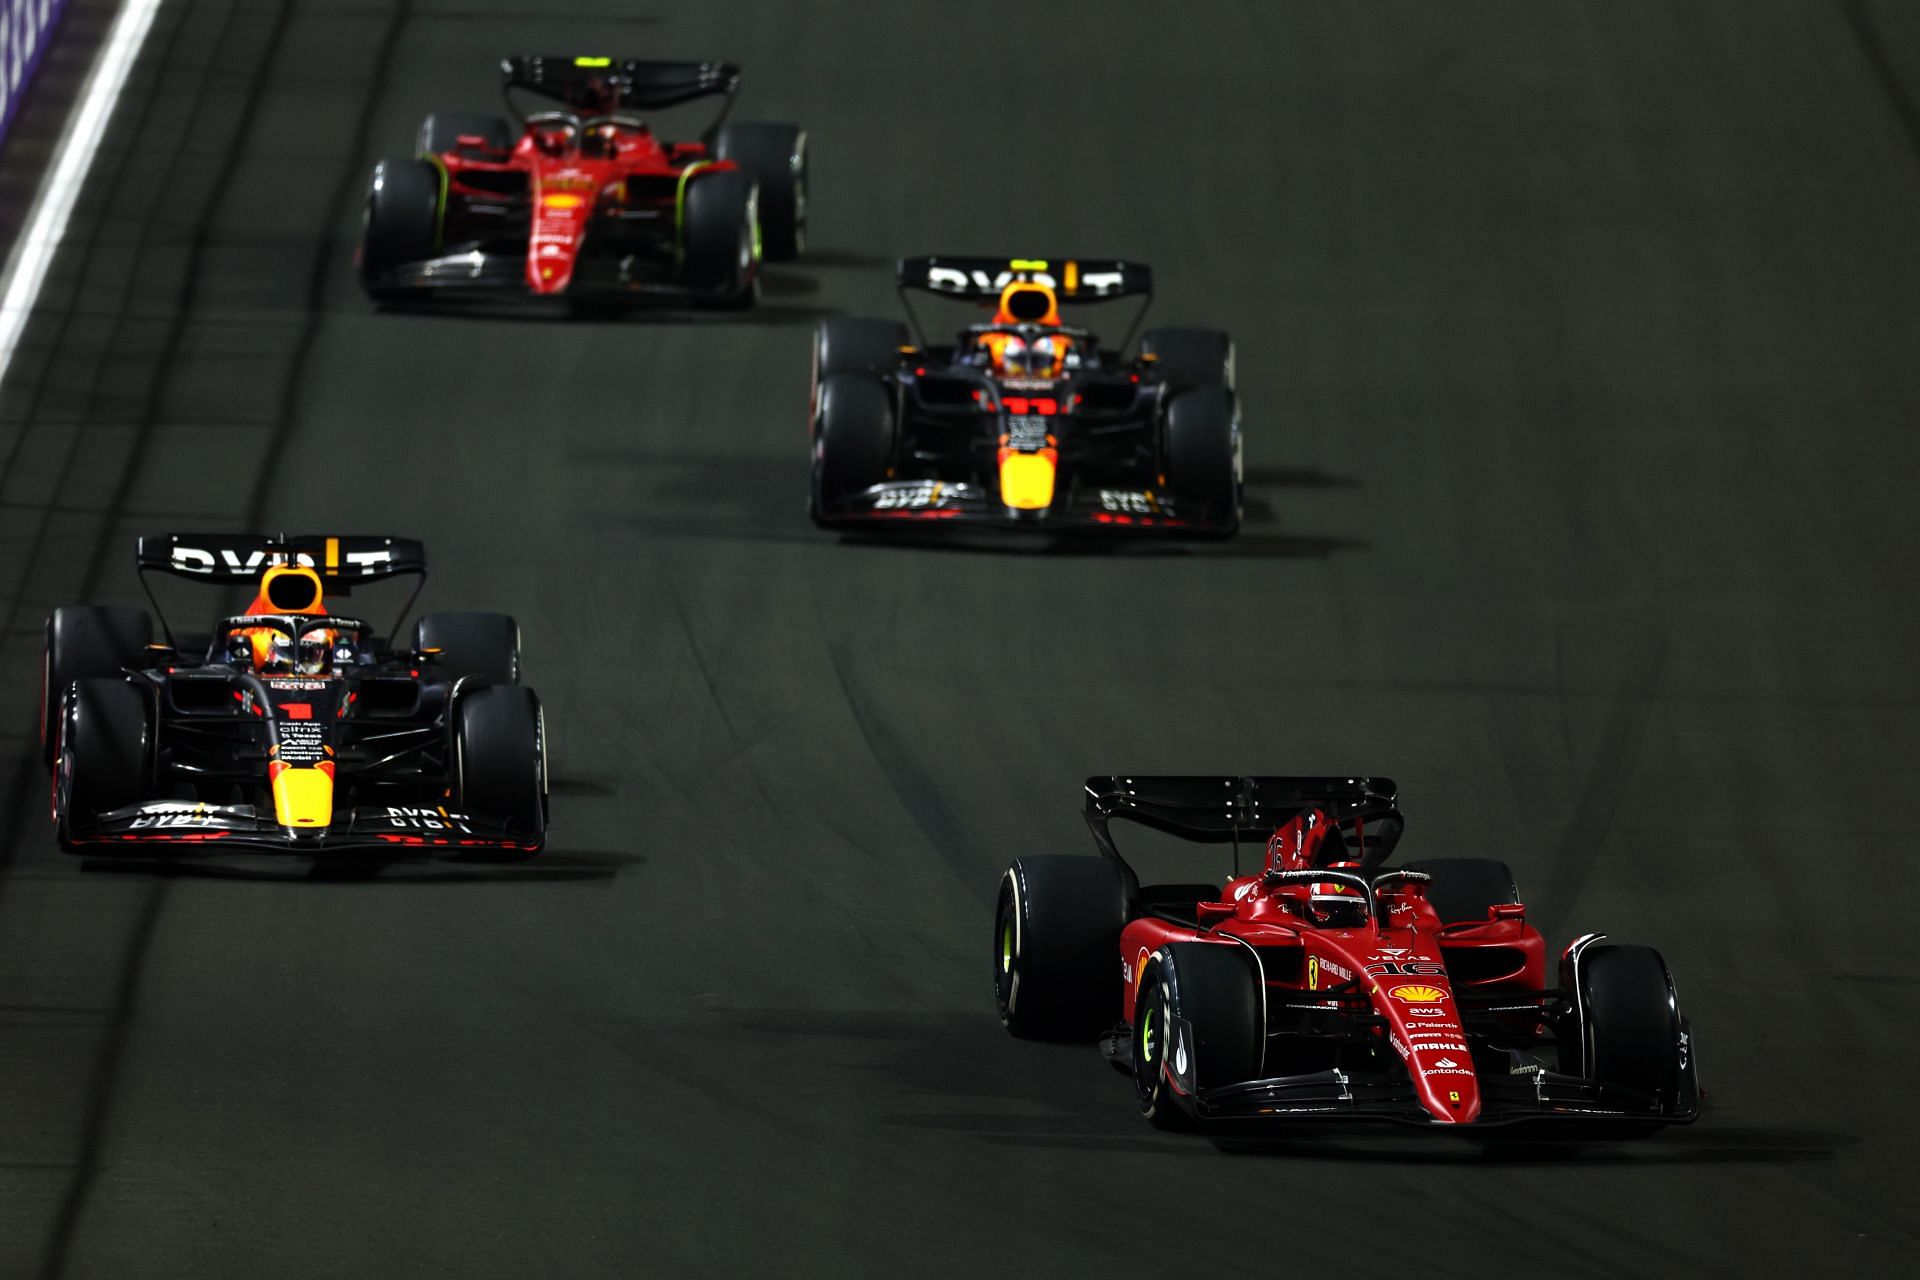 Ferrari and Red Bull revive their battle in Australia this weekend